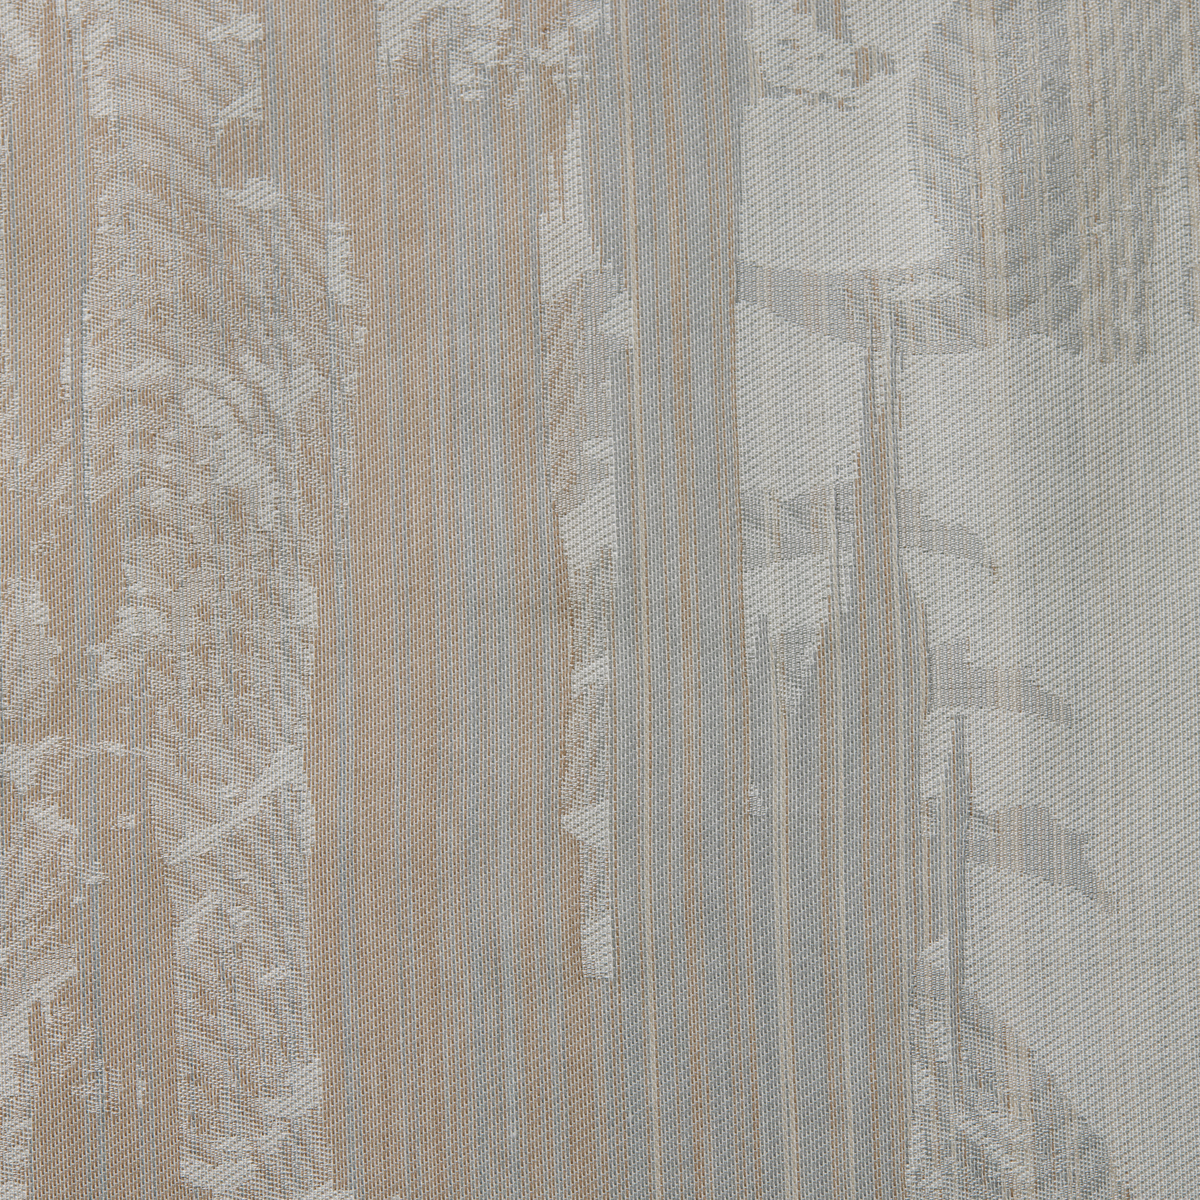 Swatch Sample of Sferra Cloister Bedding in Fog Color